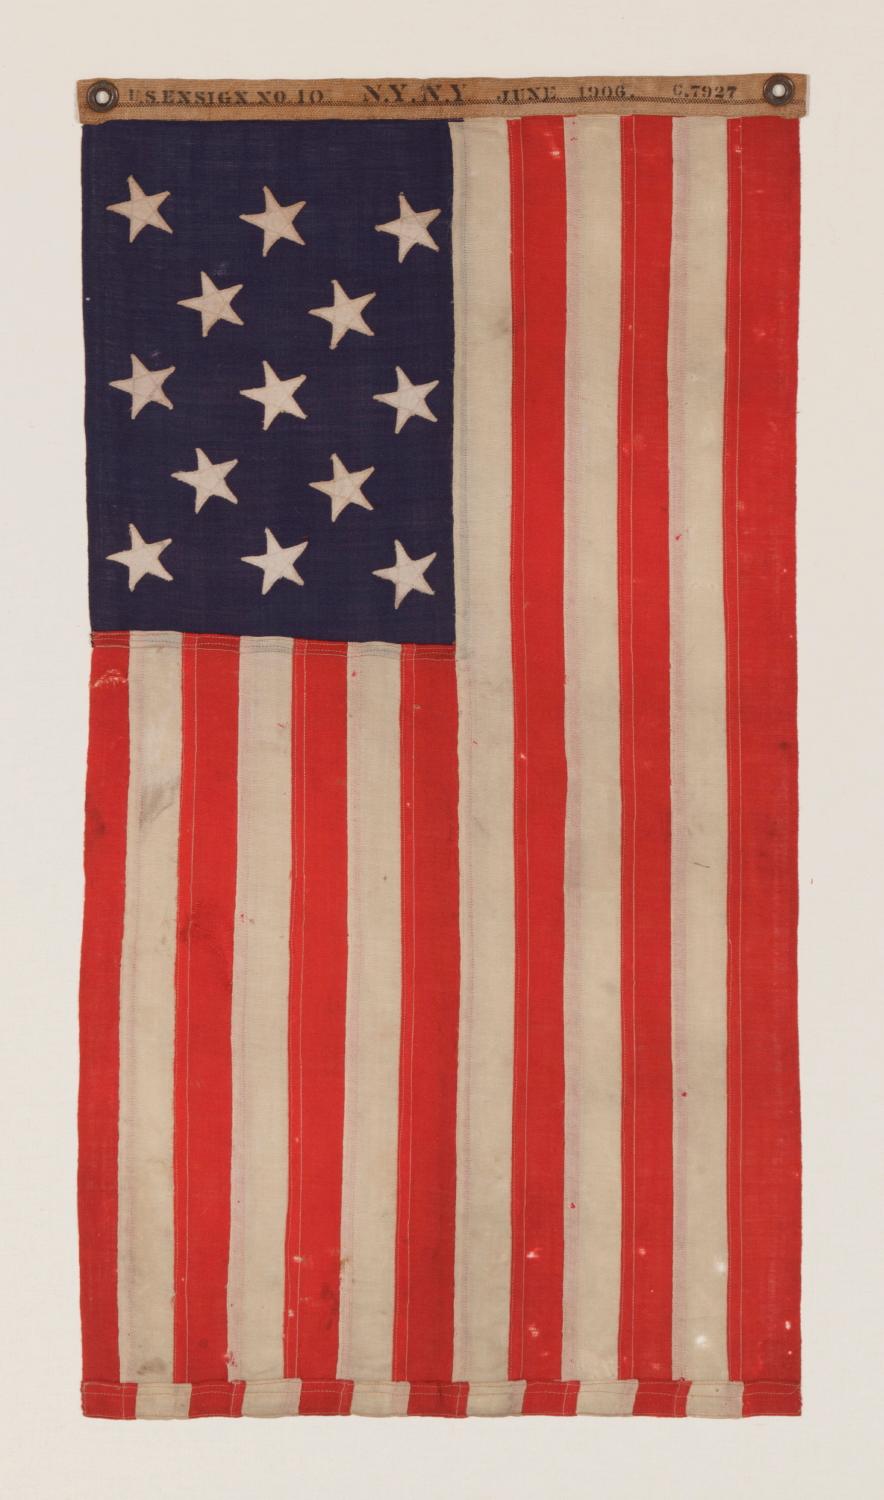 13 STARS IN A 3-2-3-2-3 PATTERN ON A UNITED STATES NAVY SMALL BOAT ENSIGN OF EXCEPTIONALLY SMALL SCALE, MADE AT THE BROOKLYN NAVY YARD, NEW YORK, SIGNED & DATED 1906 


13 star American national flag of the type used by the U.S. Navy on small boats